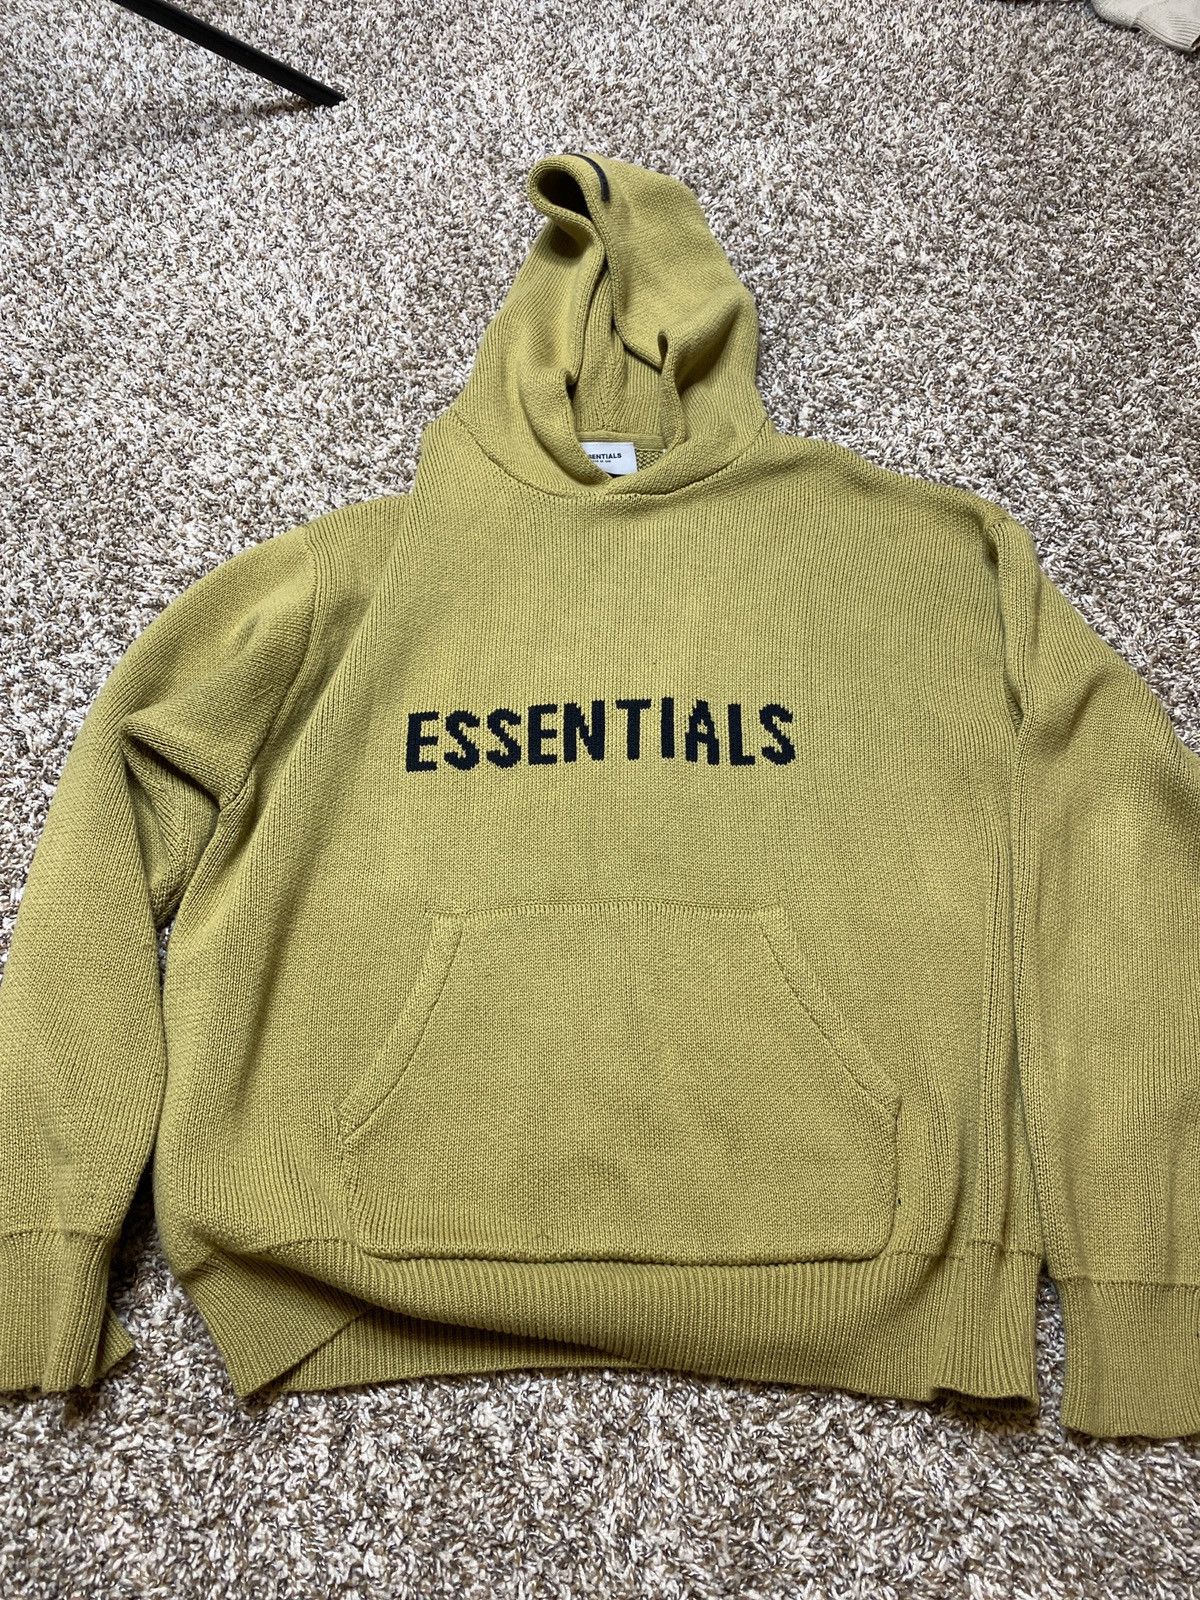 Essentials Fear of God Essentials Knit Pullover Hoodie size M | Grailed